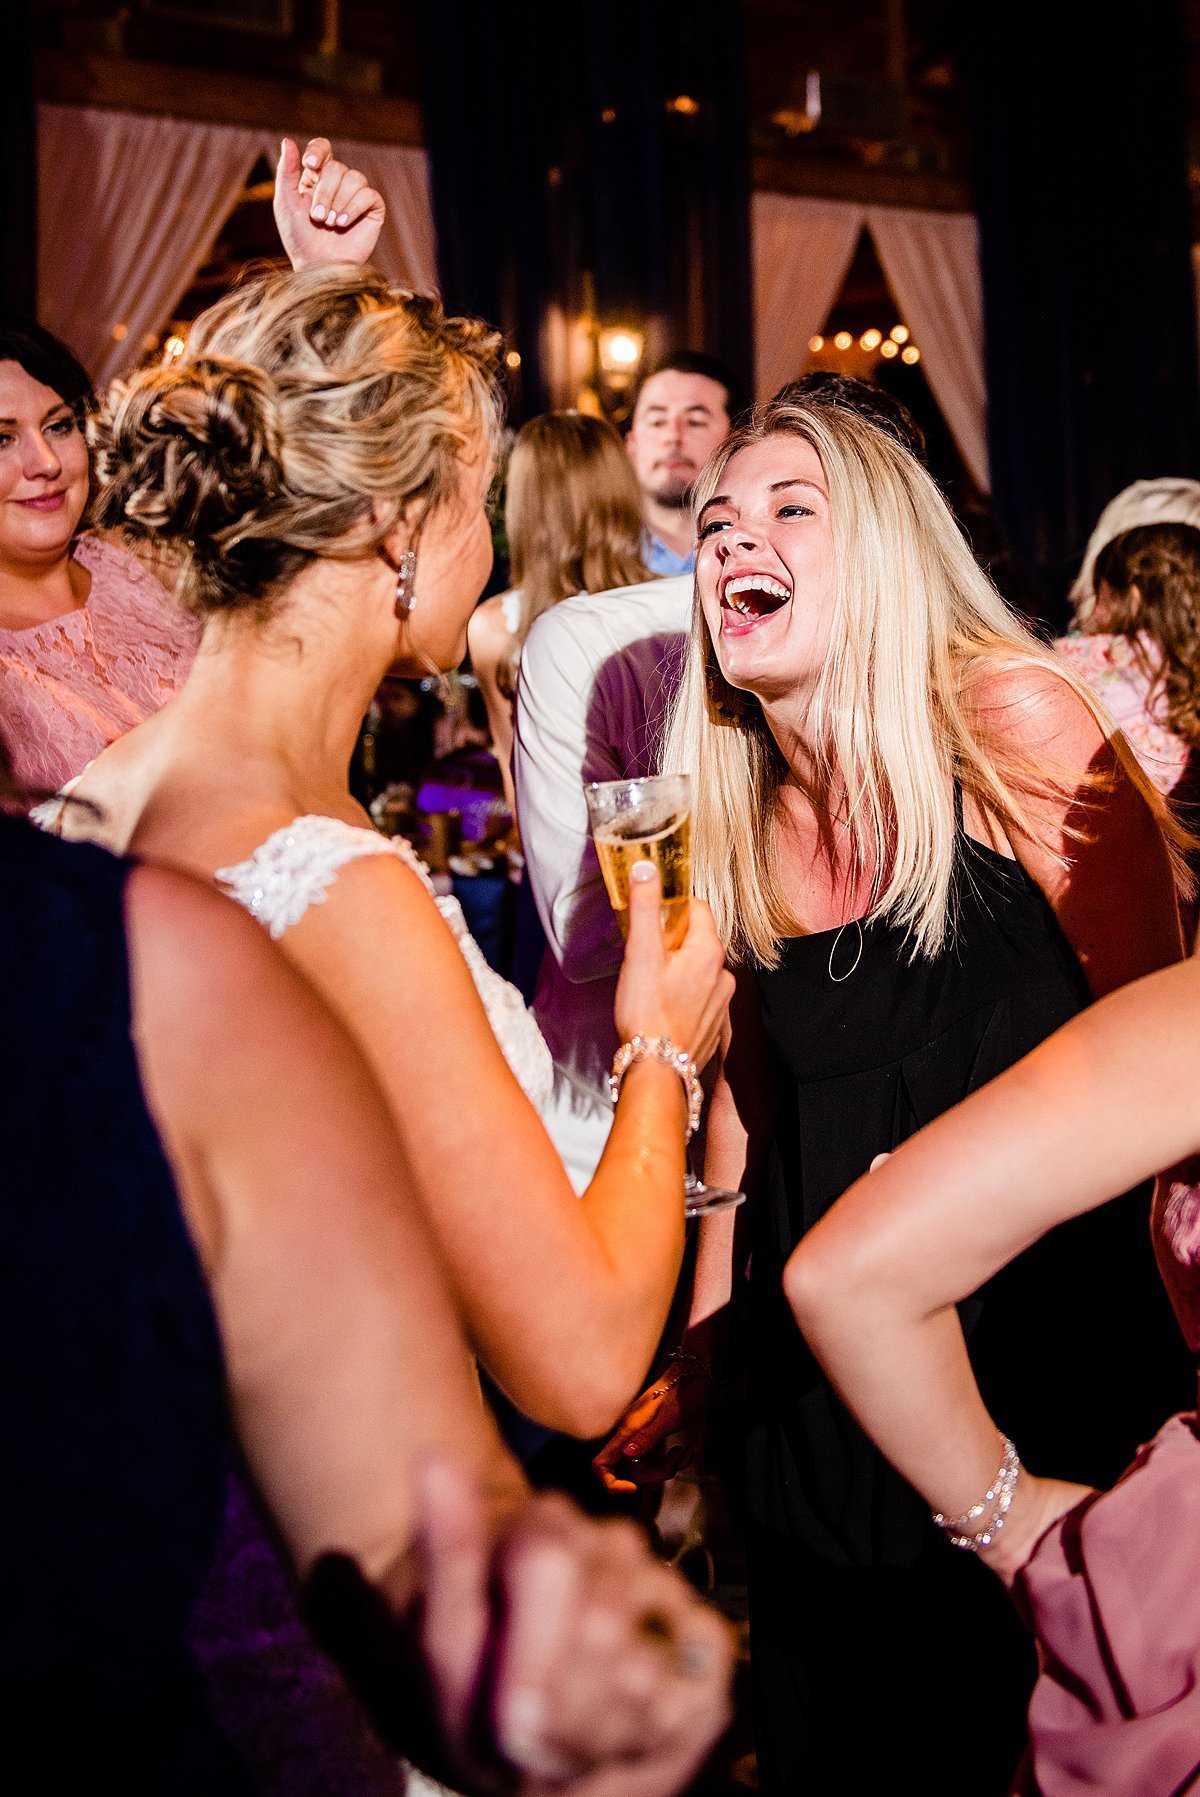 Bride and friend dancing and laughing together